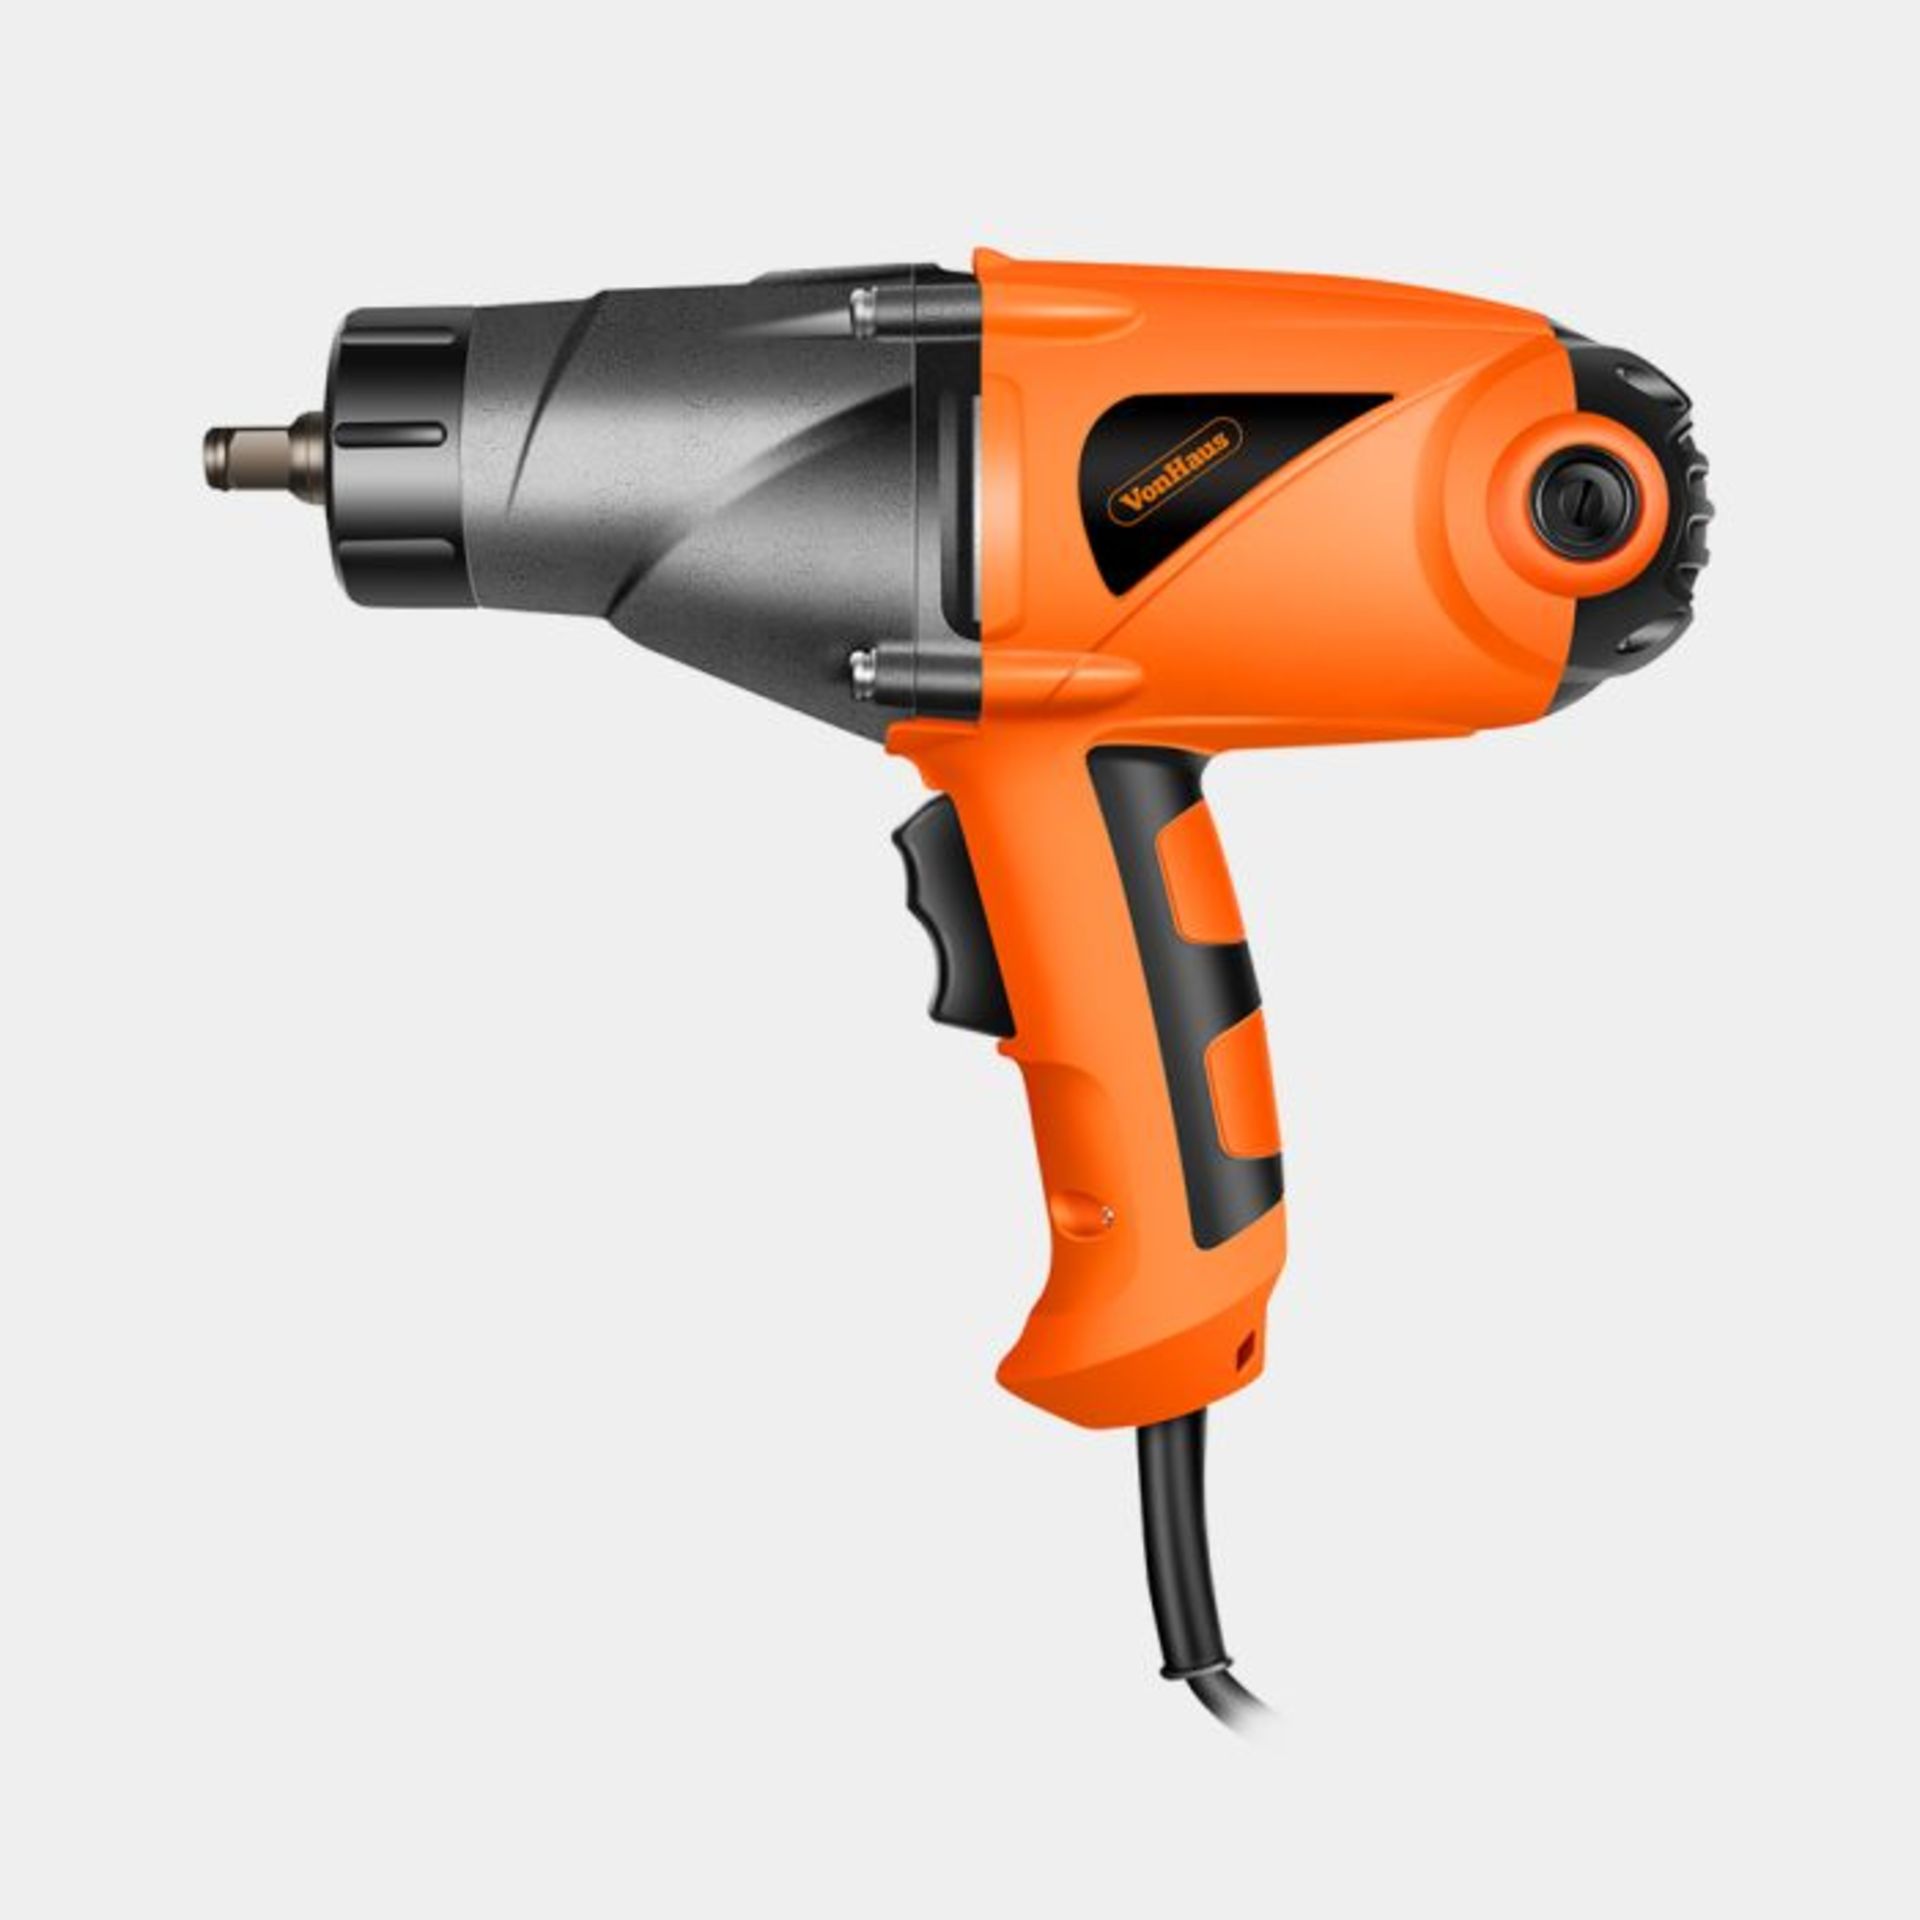 230V Impact Wrench with Square Drive. - ER34. Make easy work of heavy duty applications with our ½ “